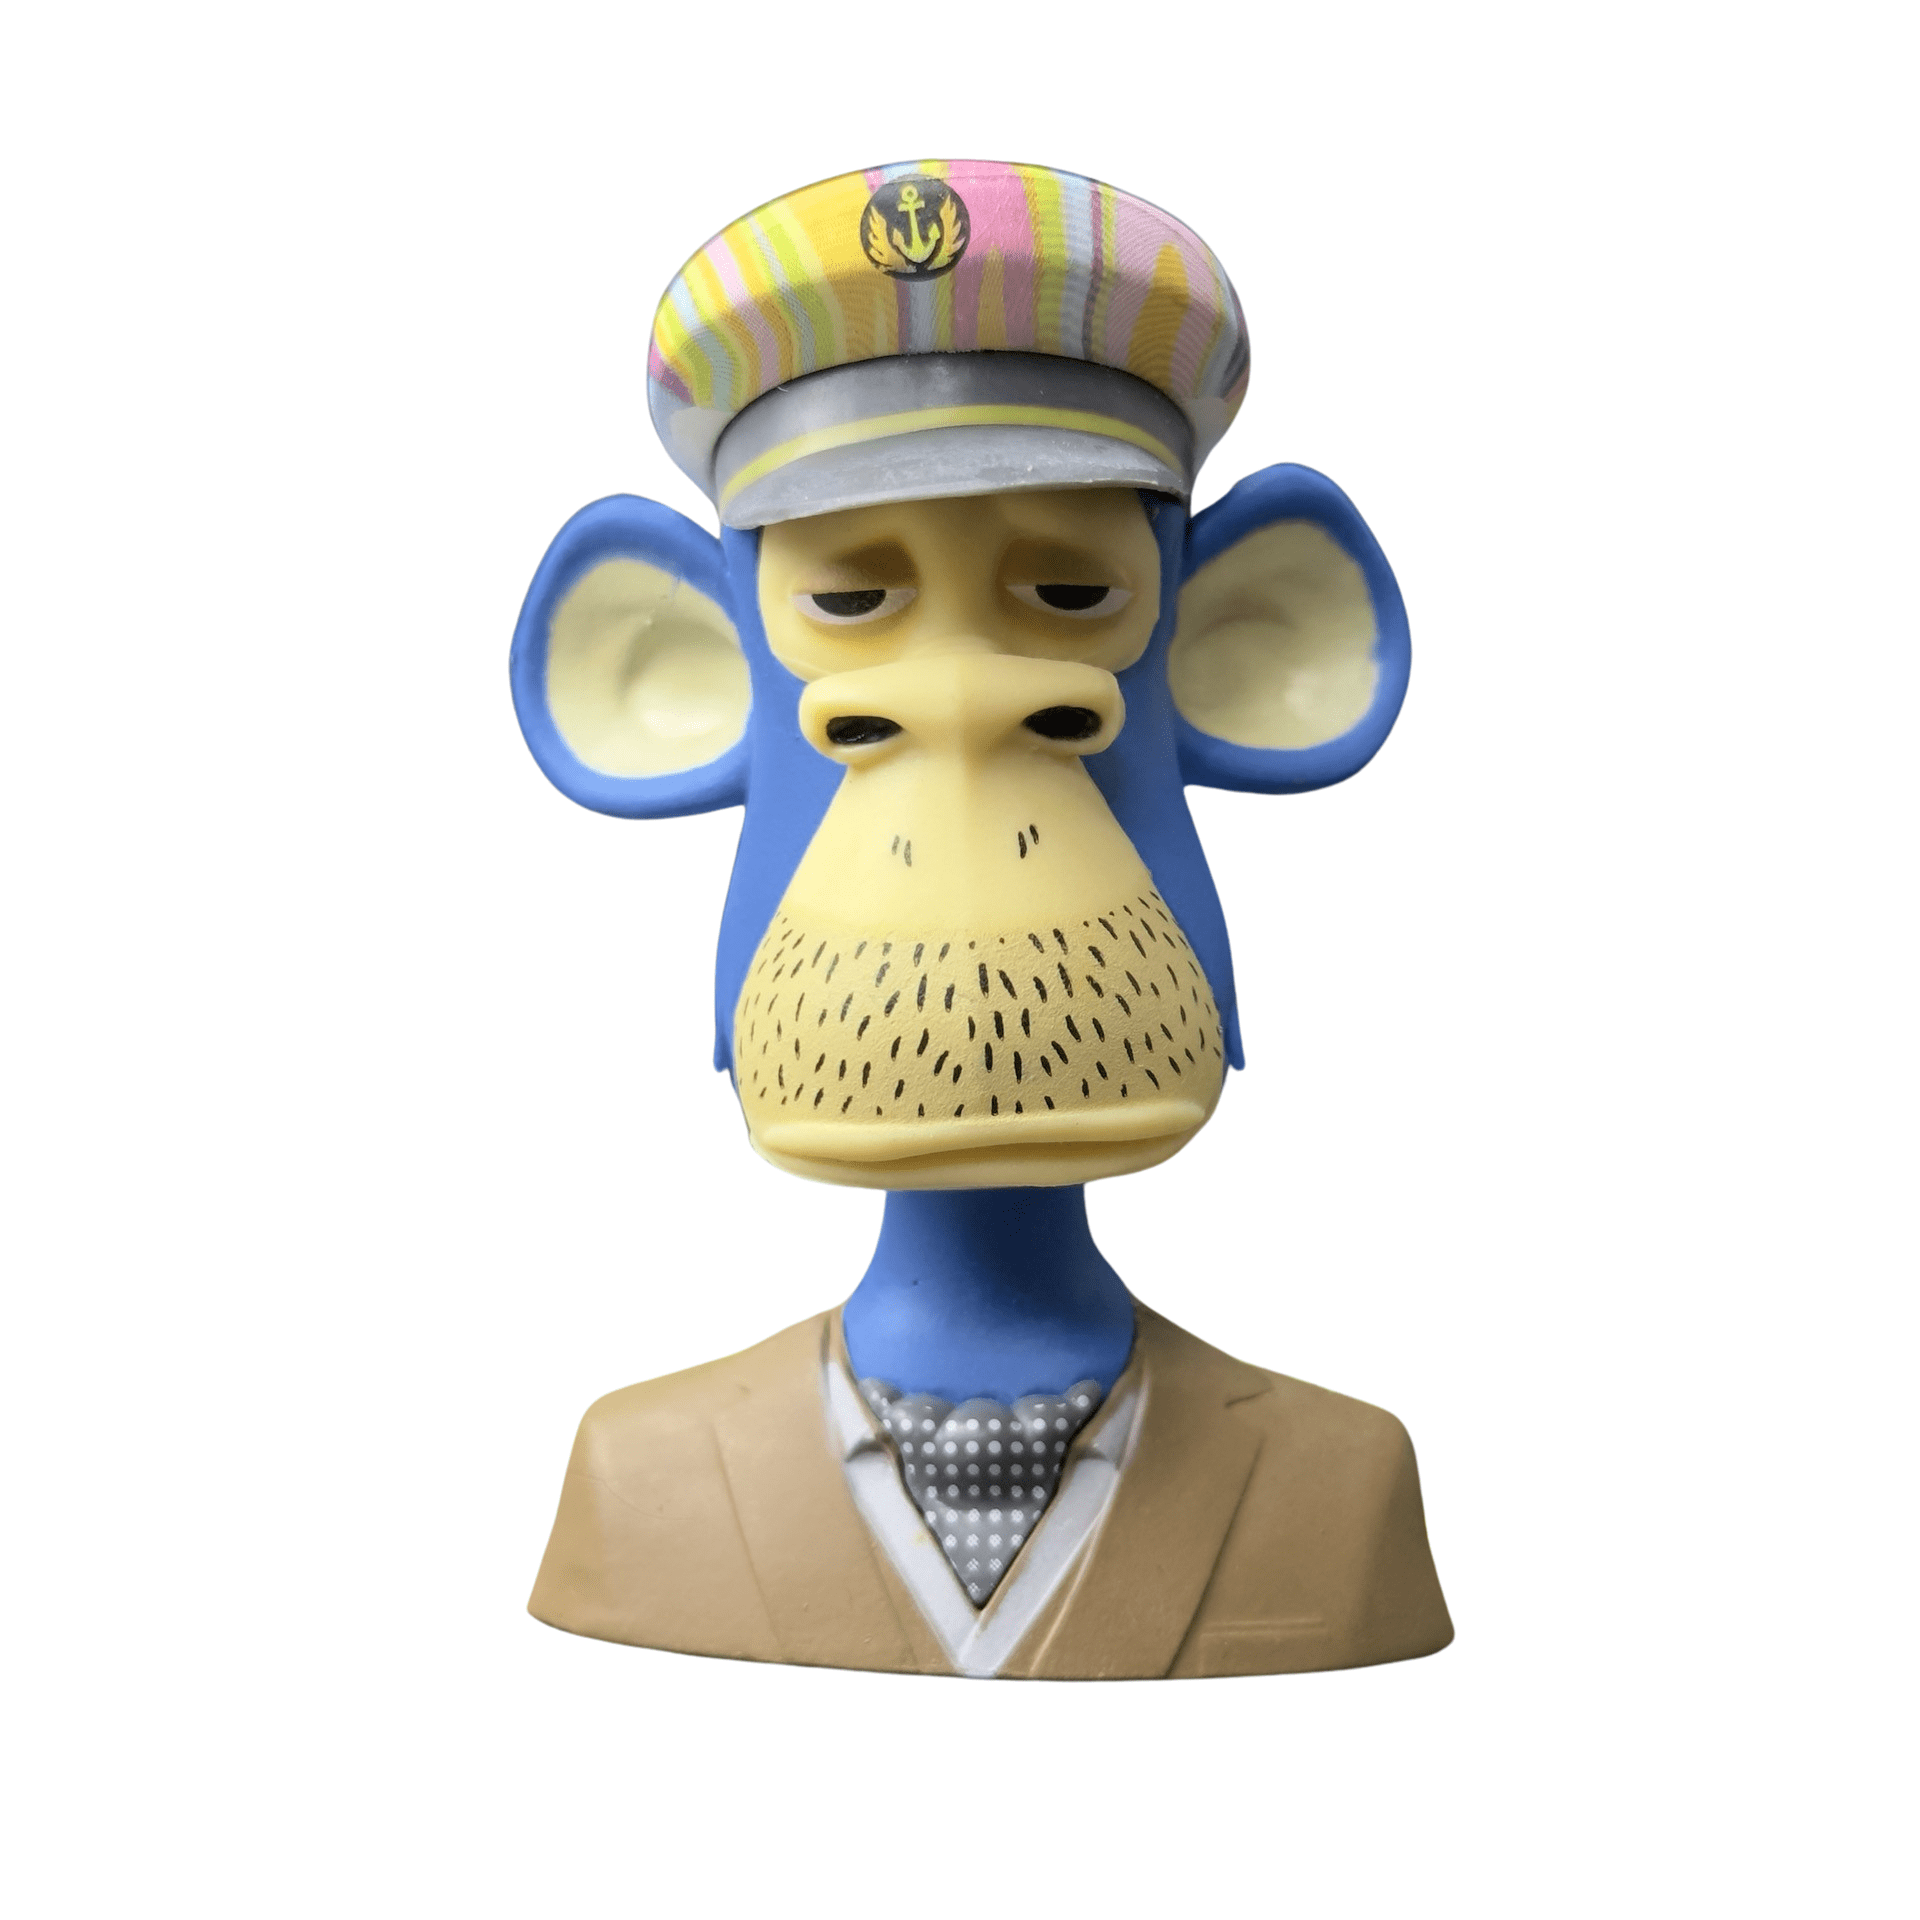 NFTY Figs Series 1 3 Figure By Bored Ape Yacht Club (#5235) 01 | Monkey Paw Mexico